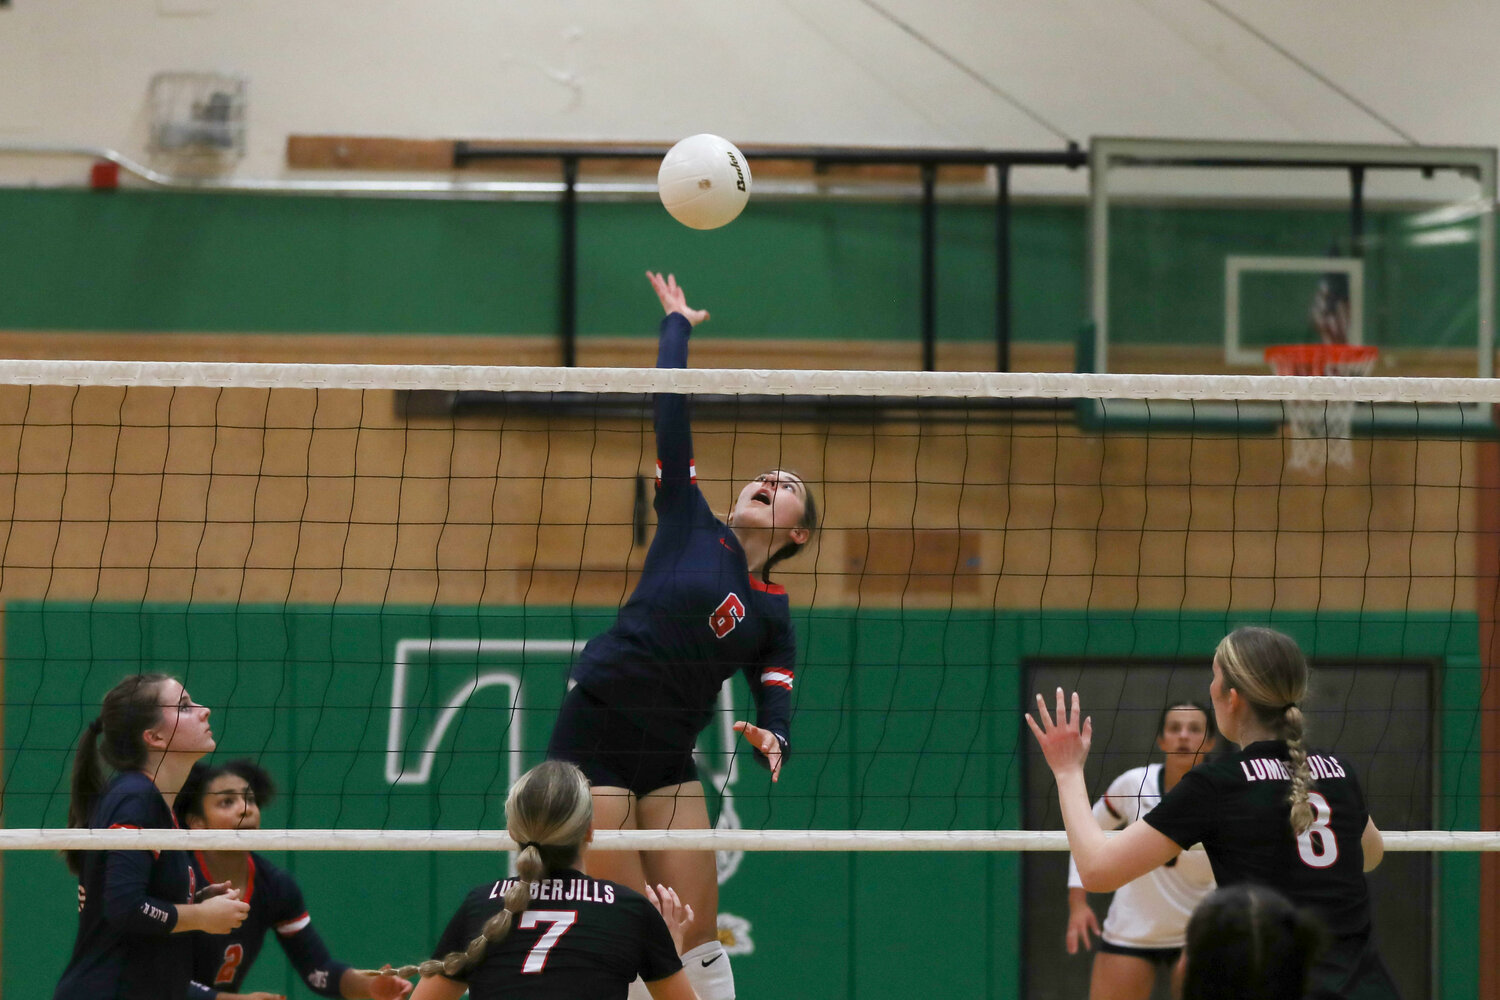 Ellie Johnson leaps to spike the ball during Black Hills' 3-2 win over R.A. Long in the first round of the 2A District 4 Tournament on Nov. 2 in Tumwater.